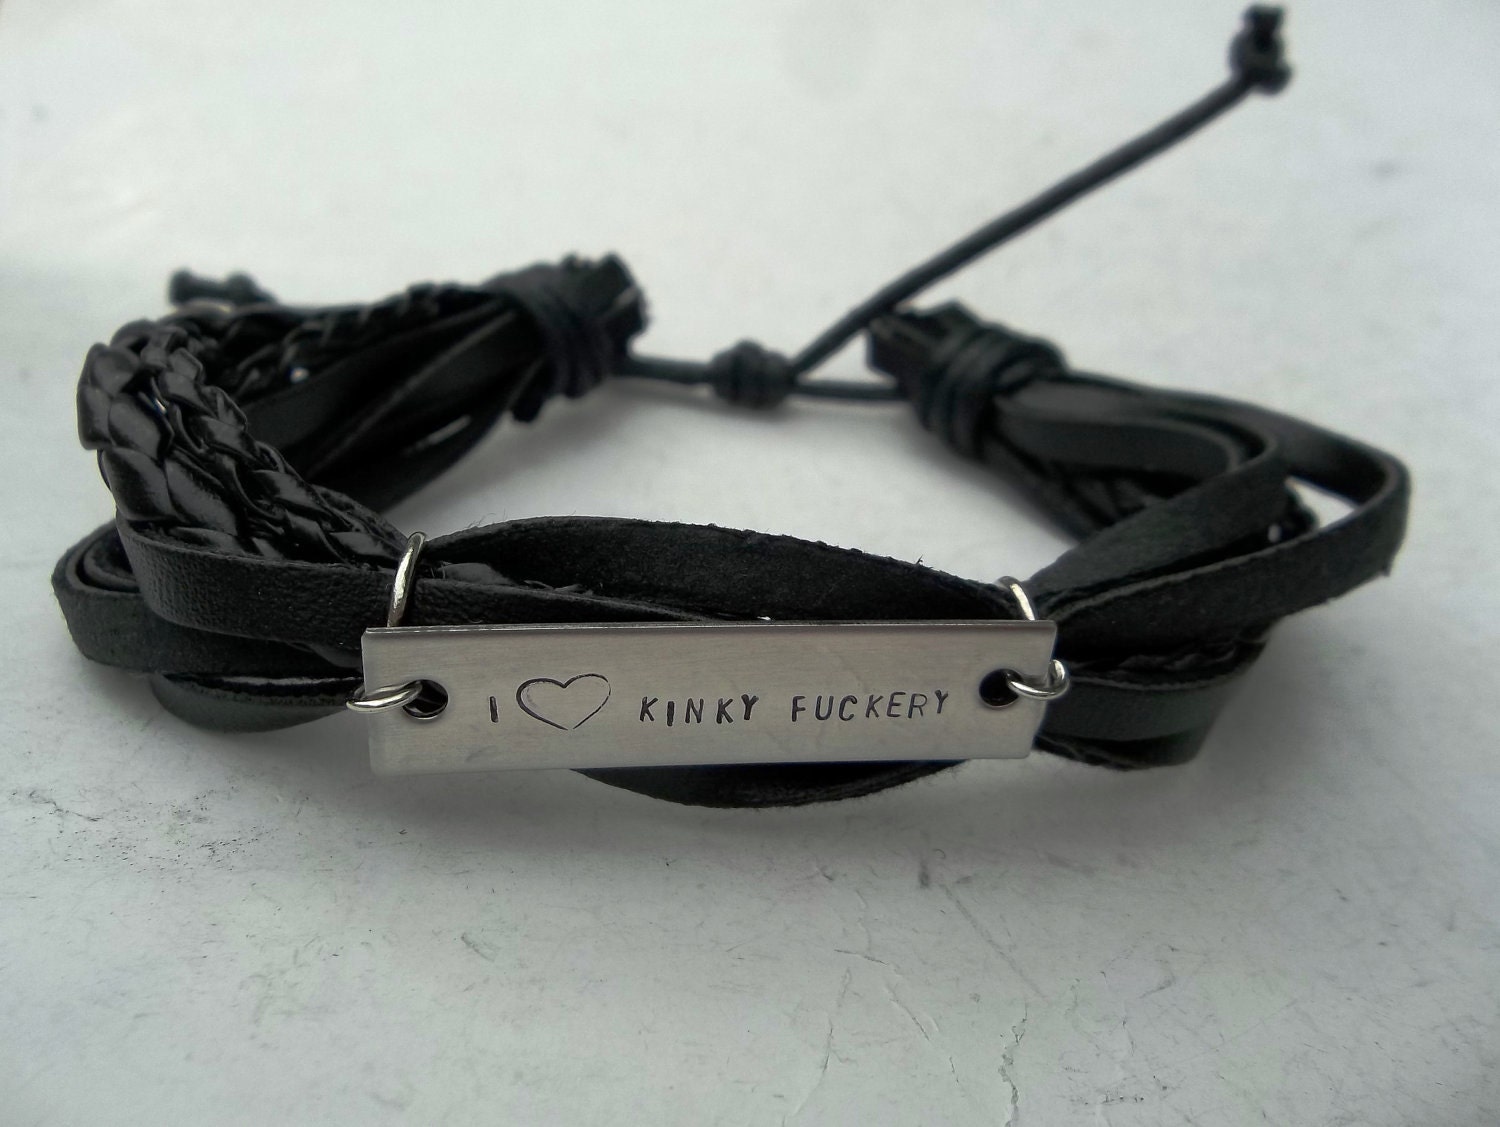 MATURE Fifty Shades I Love Kinky F%ckery Leather Bracelet Hand Stamped Inspired by the Book 50 Shades